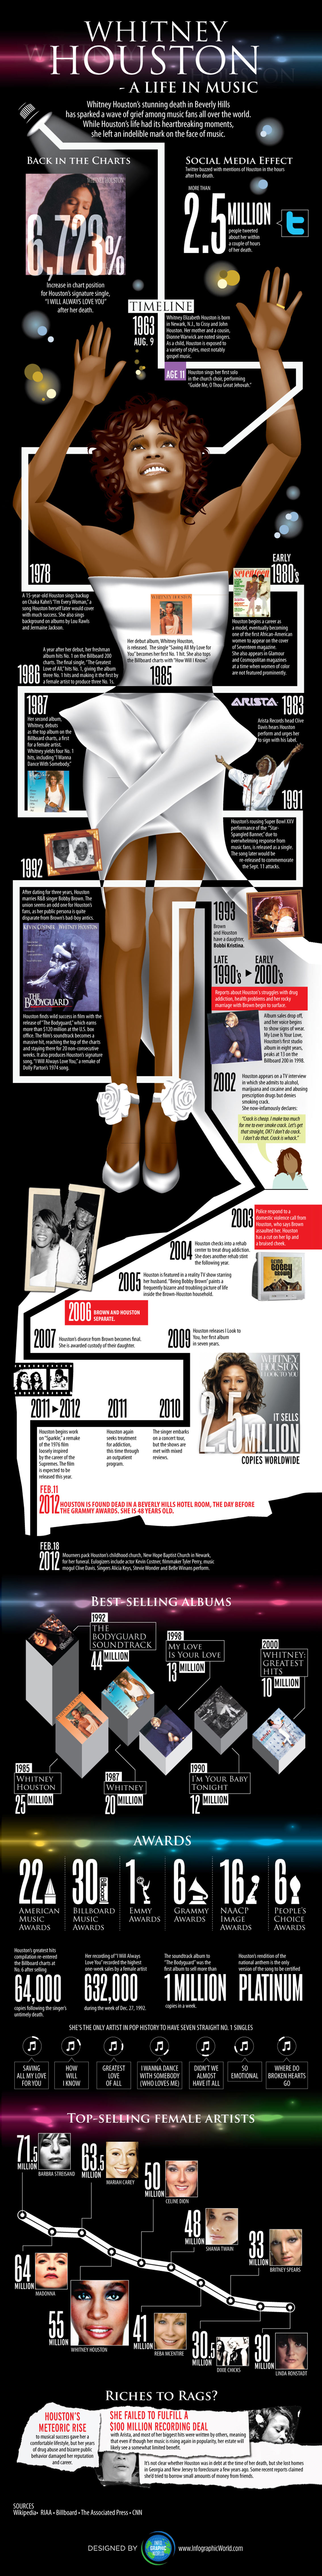 Whitney Houston - A Life in Music Infographic